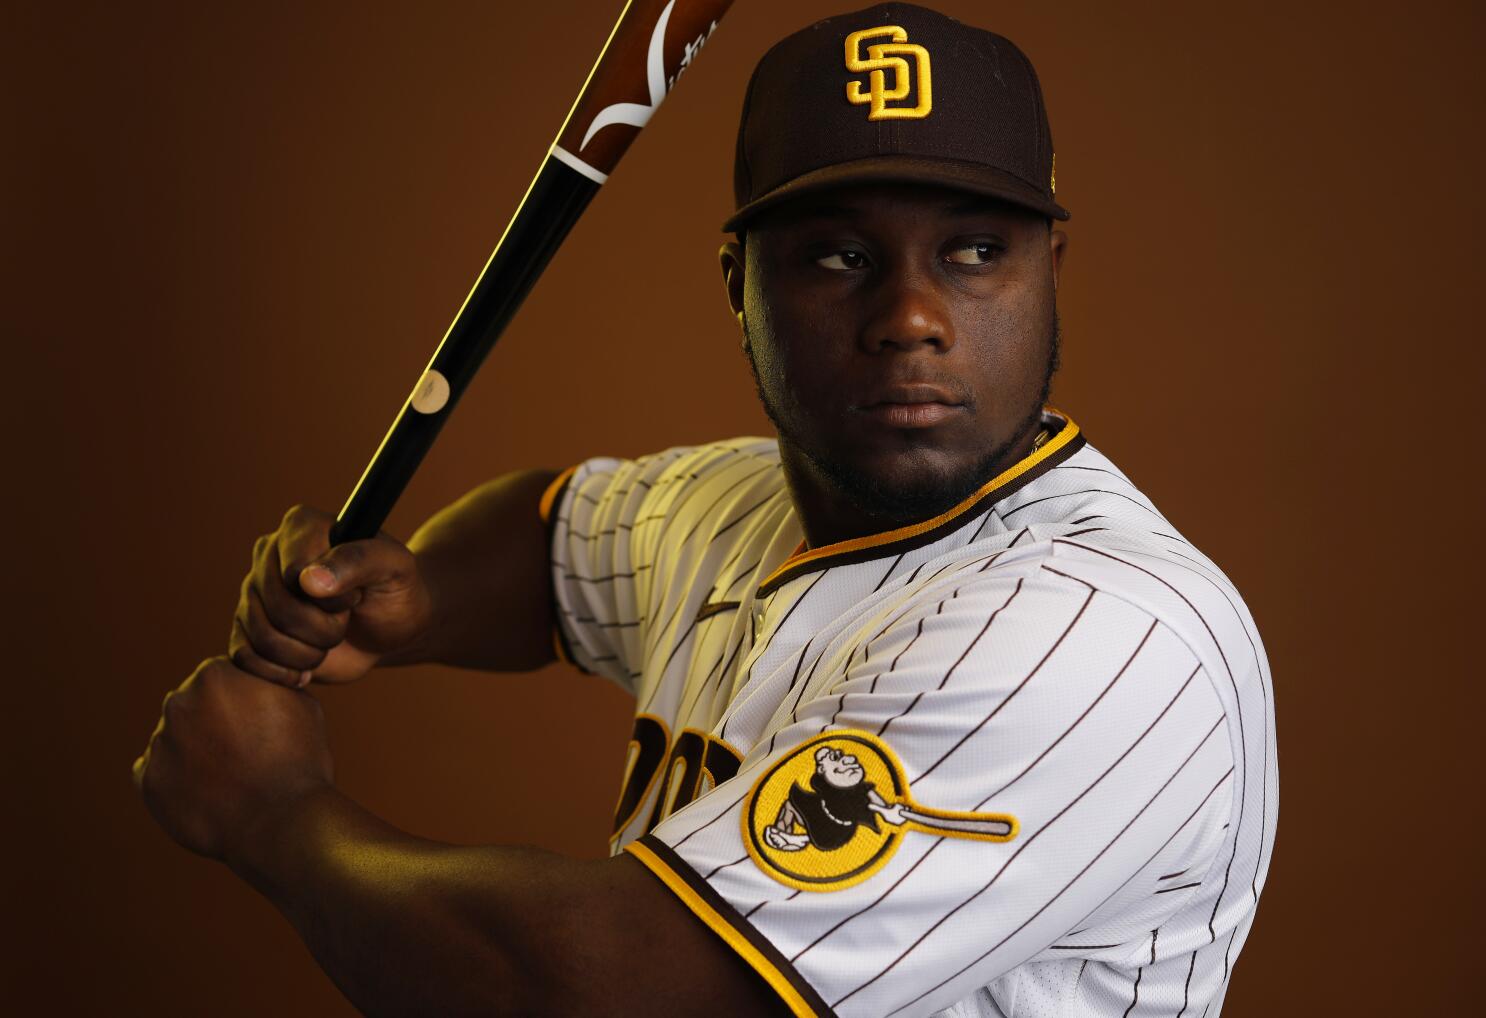 Greg Vaughn San Diego Padres Editorial Photo - Image of outfield